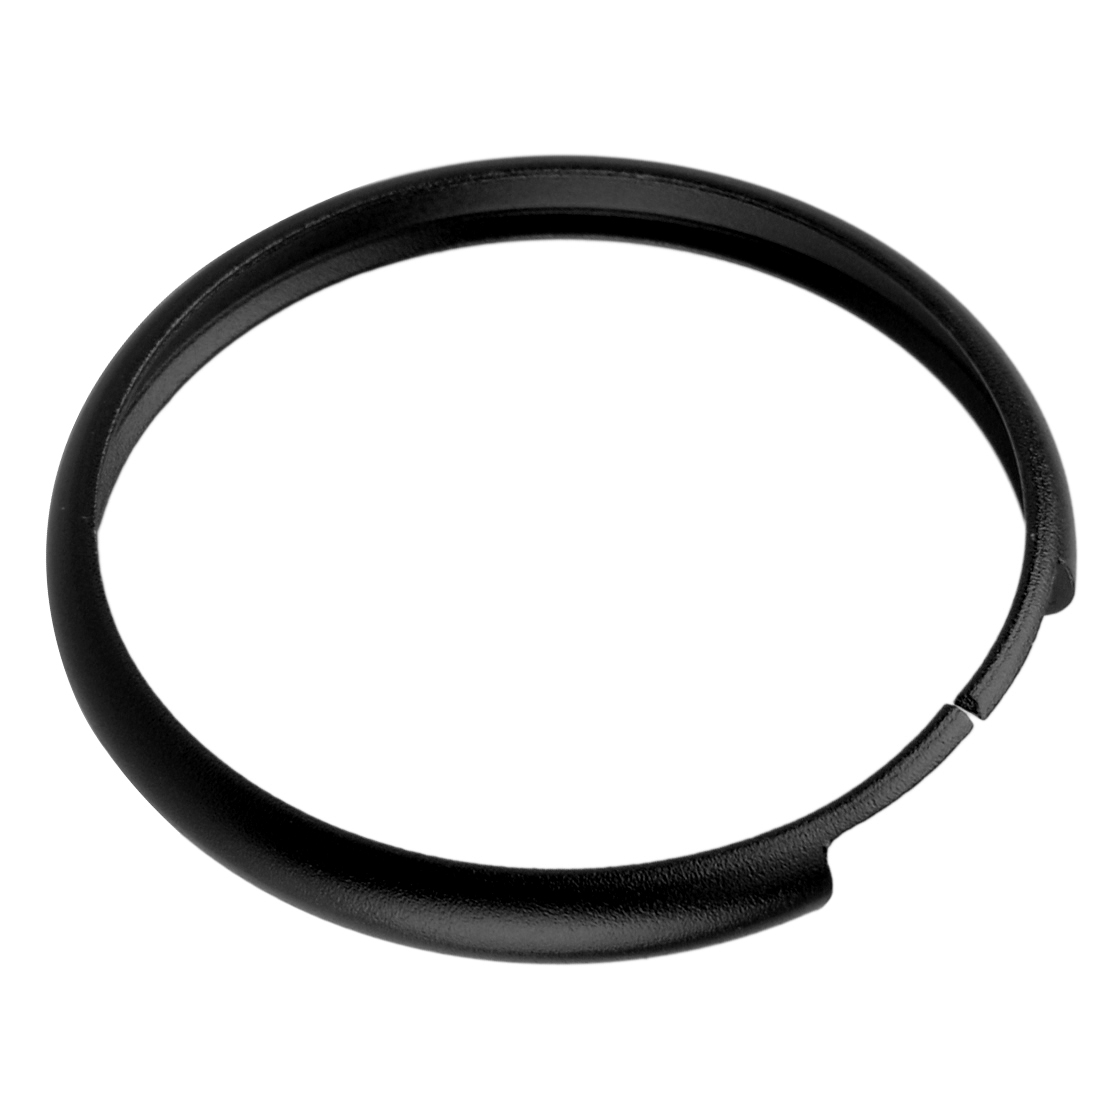 Details about   Metal Protective Smart Replacement Ring Deco fit For 2008-up Mini Cooper Key Fob 